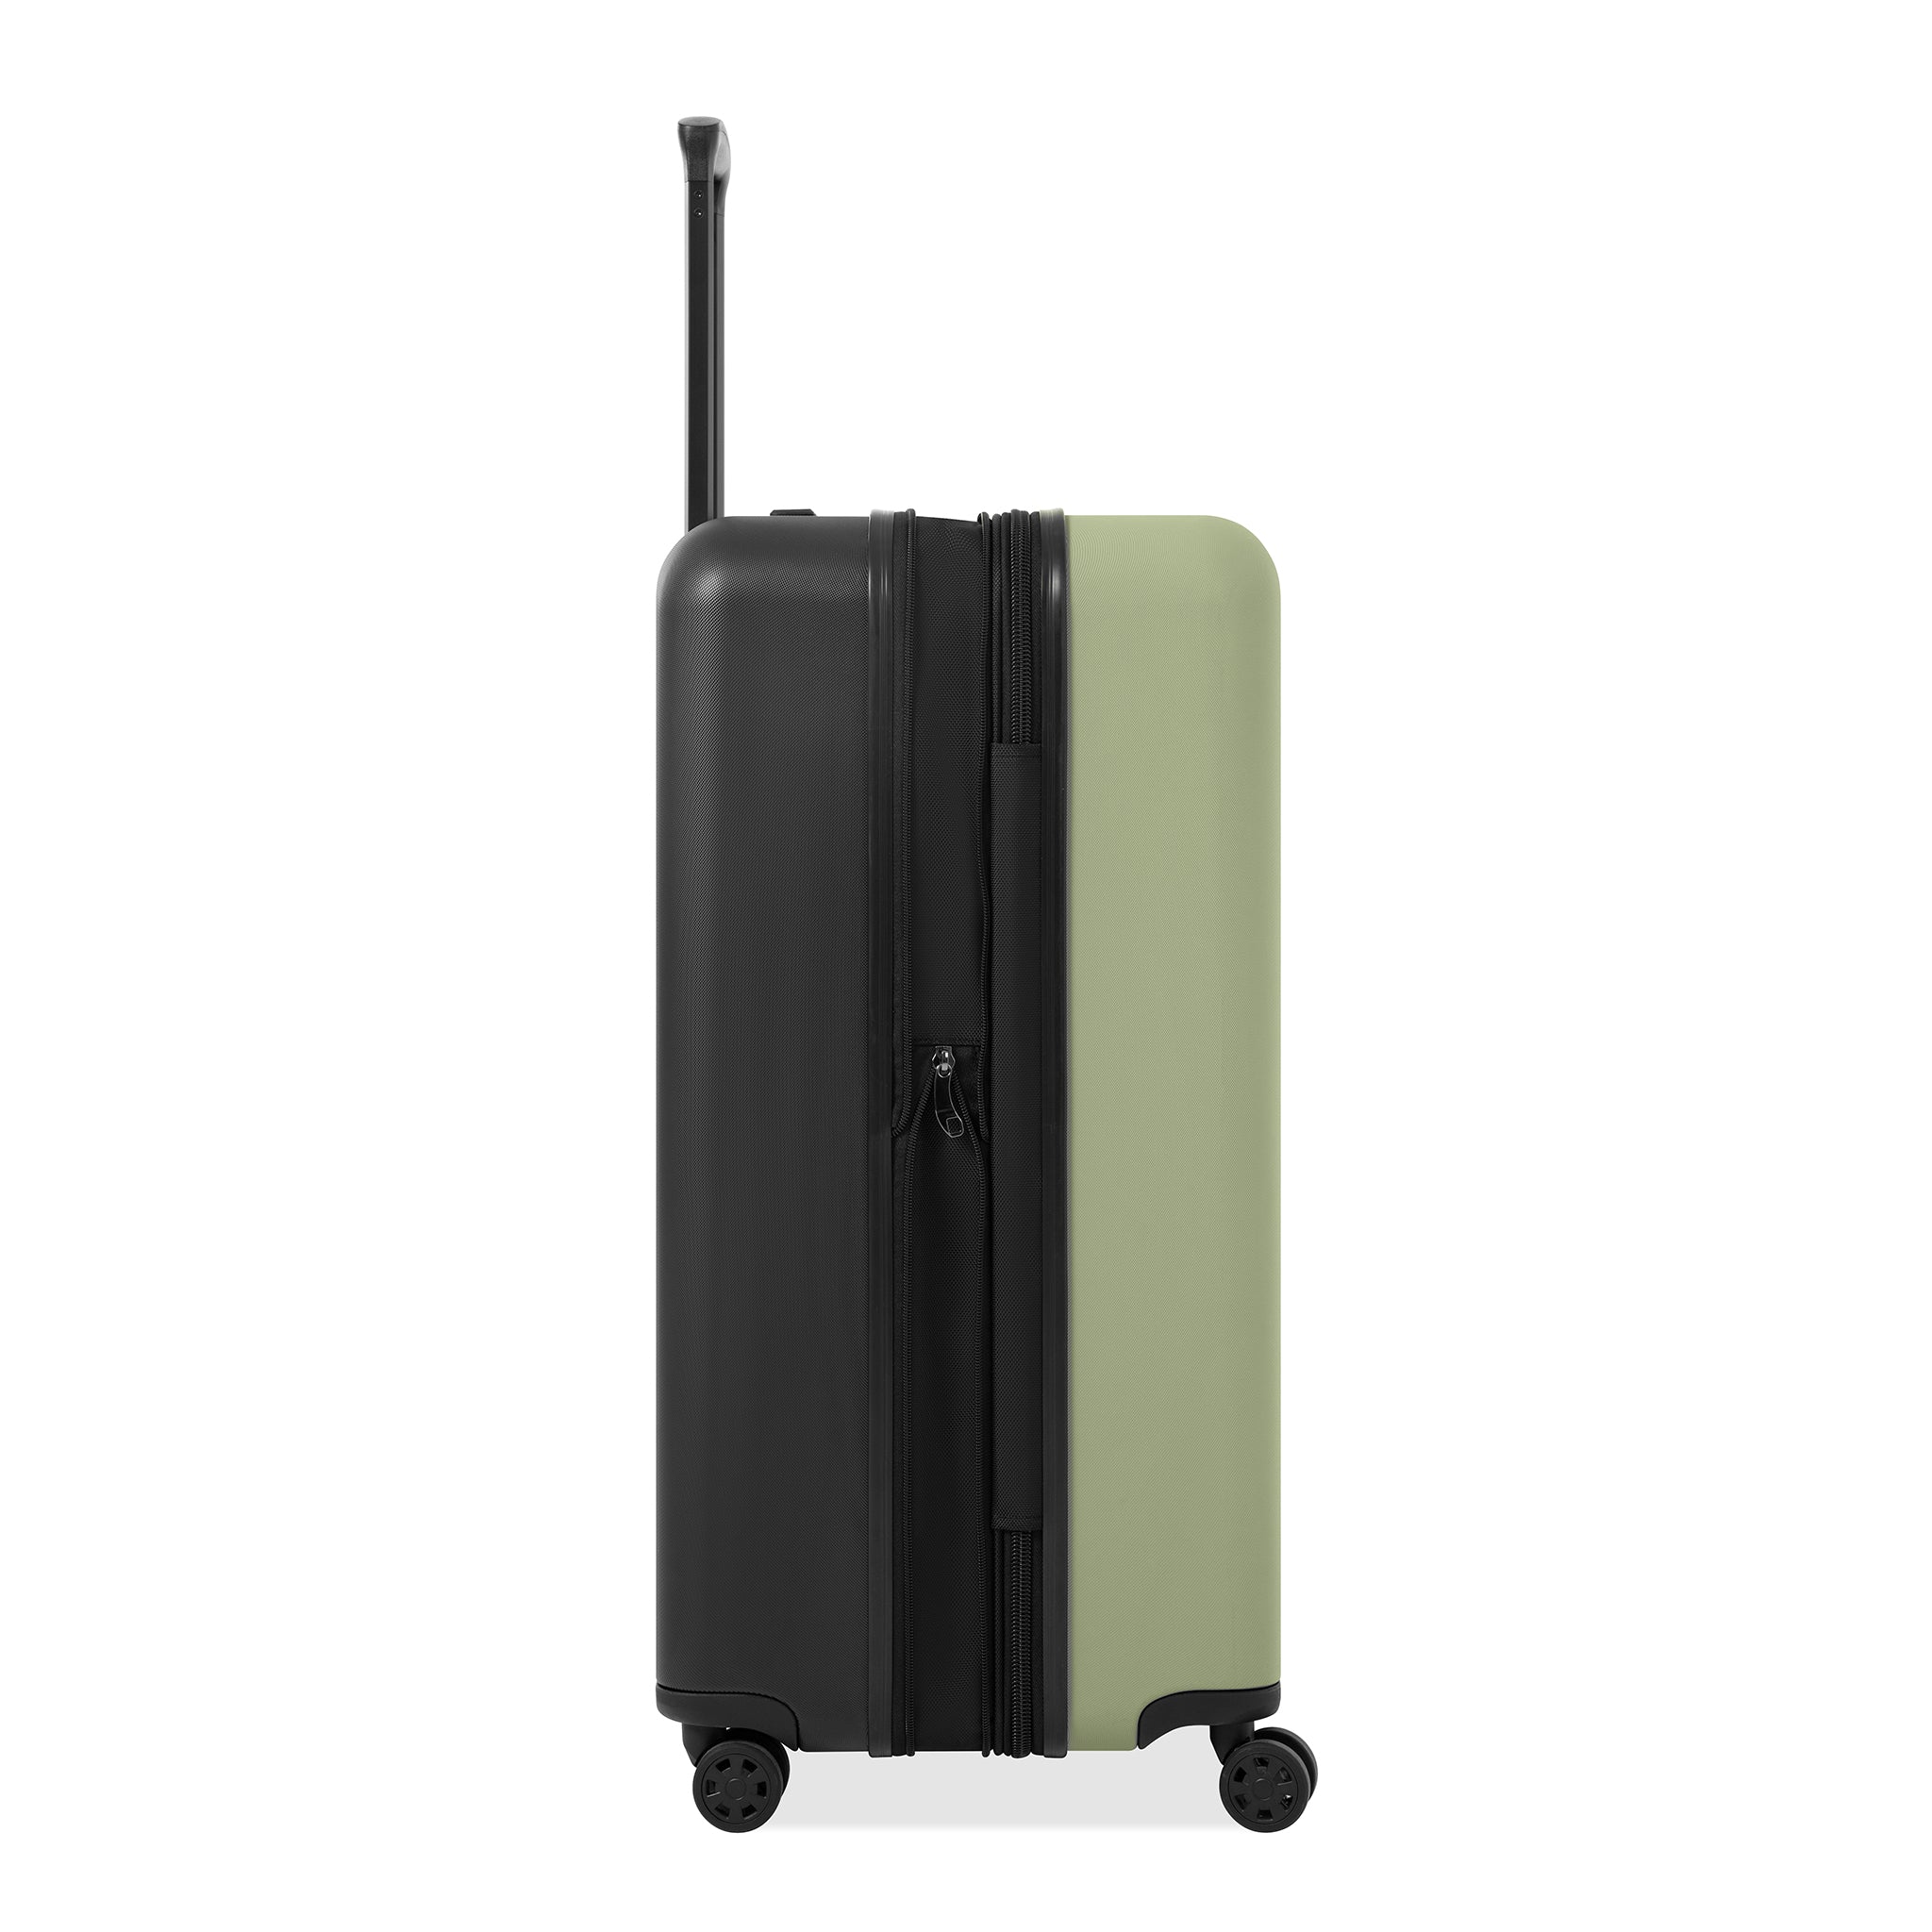 Side view of Sherpani hard-shell carry-on luggage, the Meridian in Sage. Meridian features include a retractable luggage handle, uncrushable exterior, TSA-approved locking zippers and four 36-degree spinner wheels. The Sage color is two-toned with the front of the suitcase in sage green and the back in classic black. 